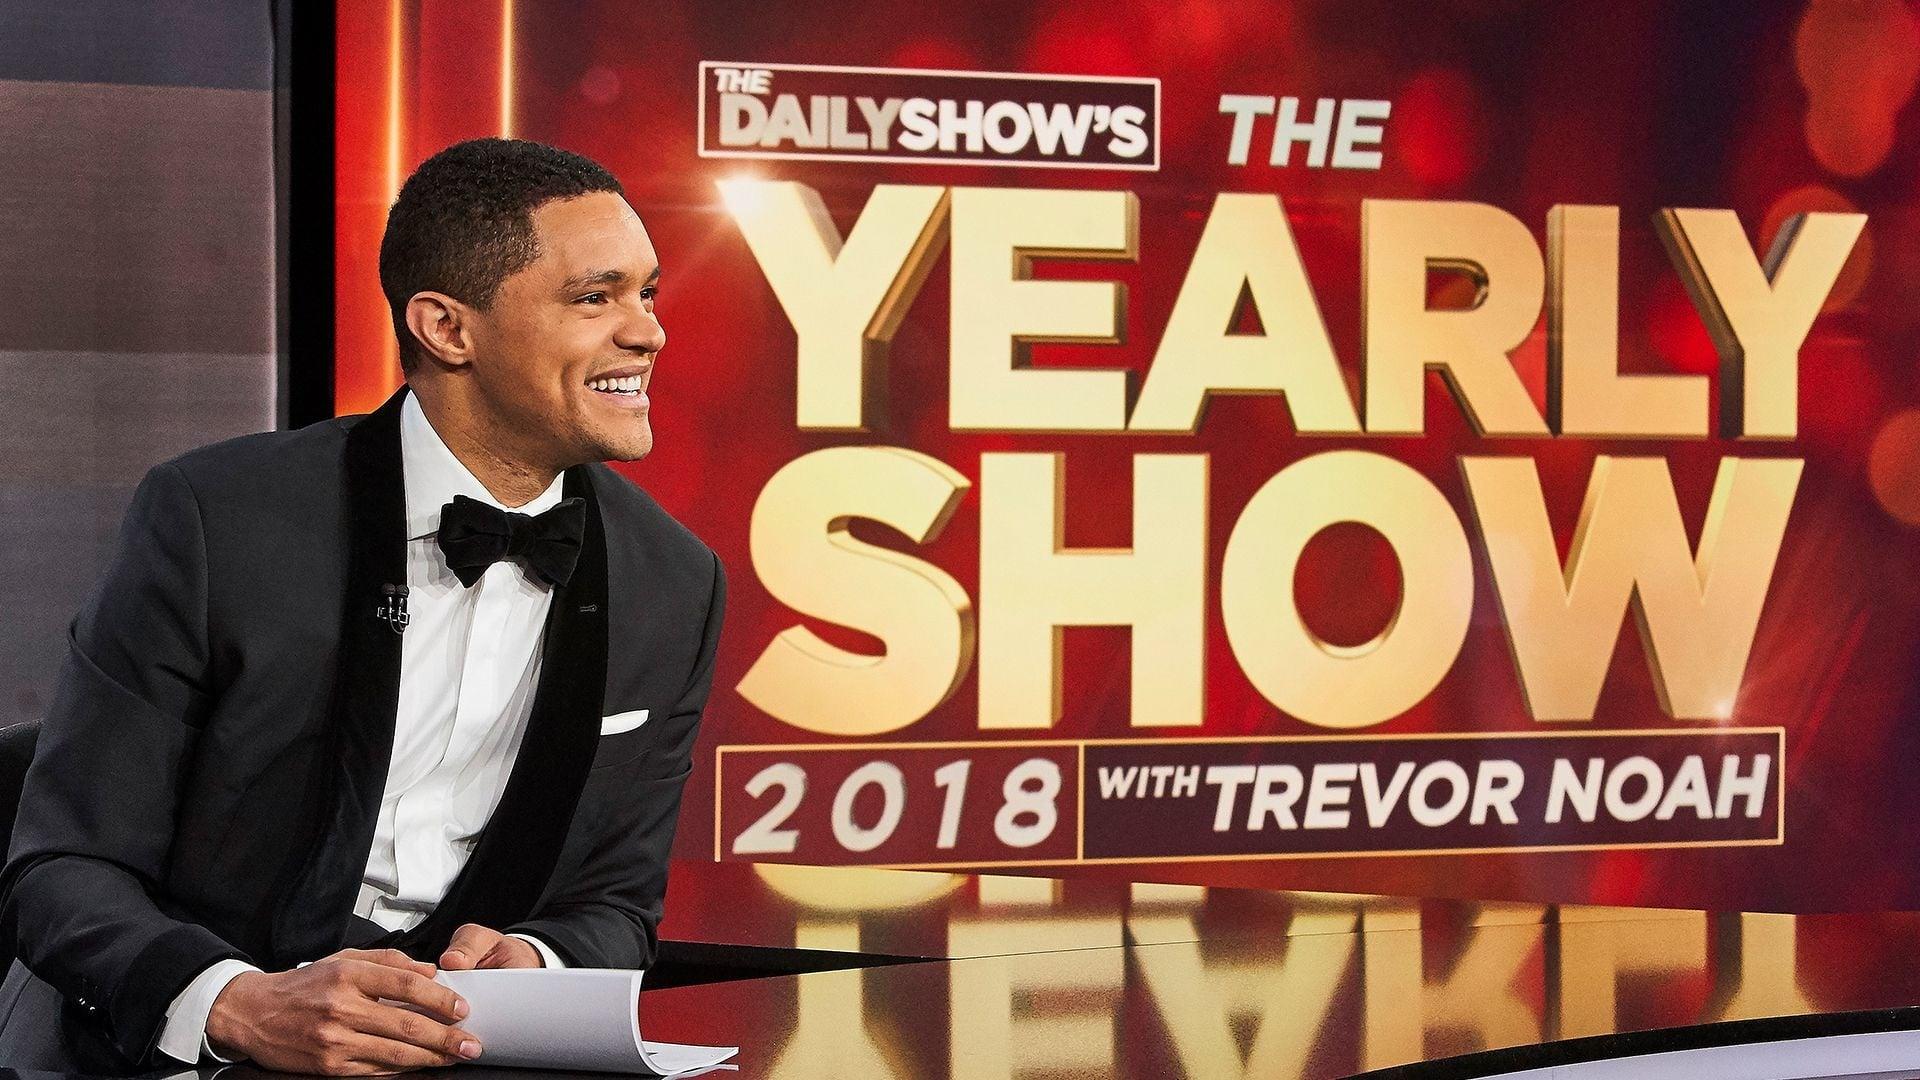 The Daily Show (S24E38) The Daily Show's The Yearly Show 2018 Summary